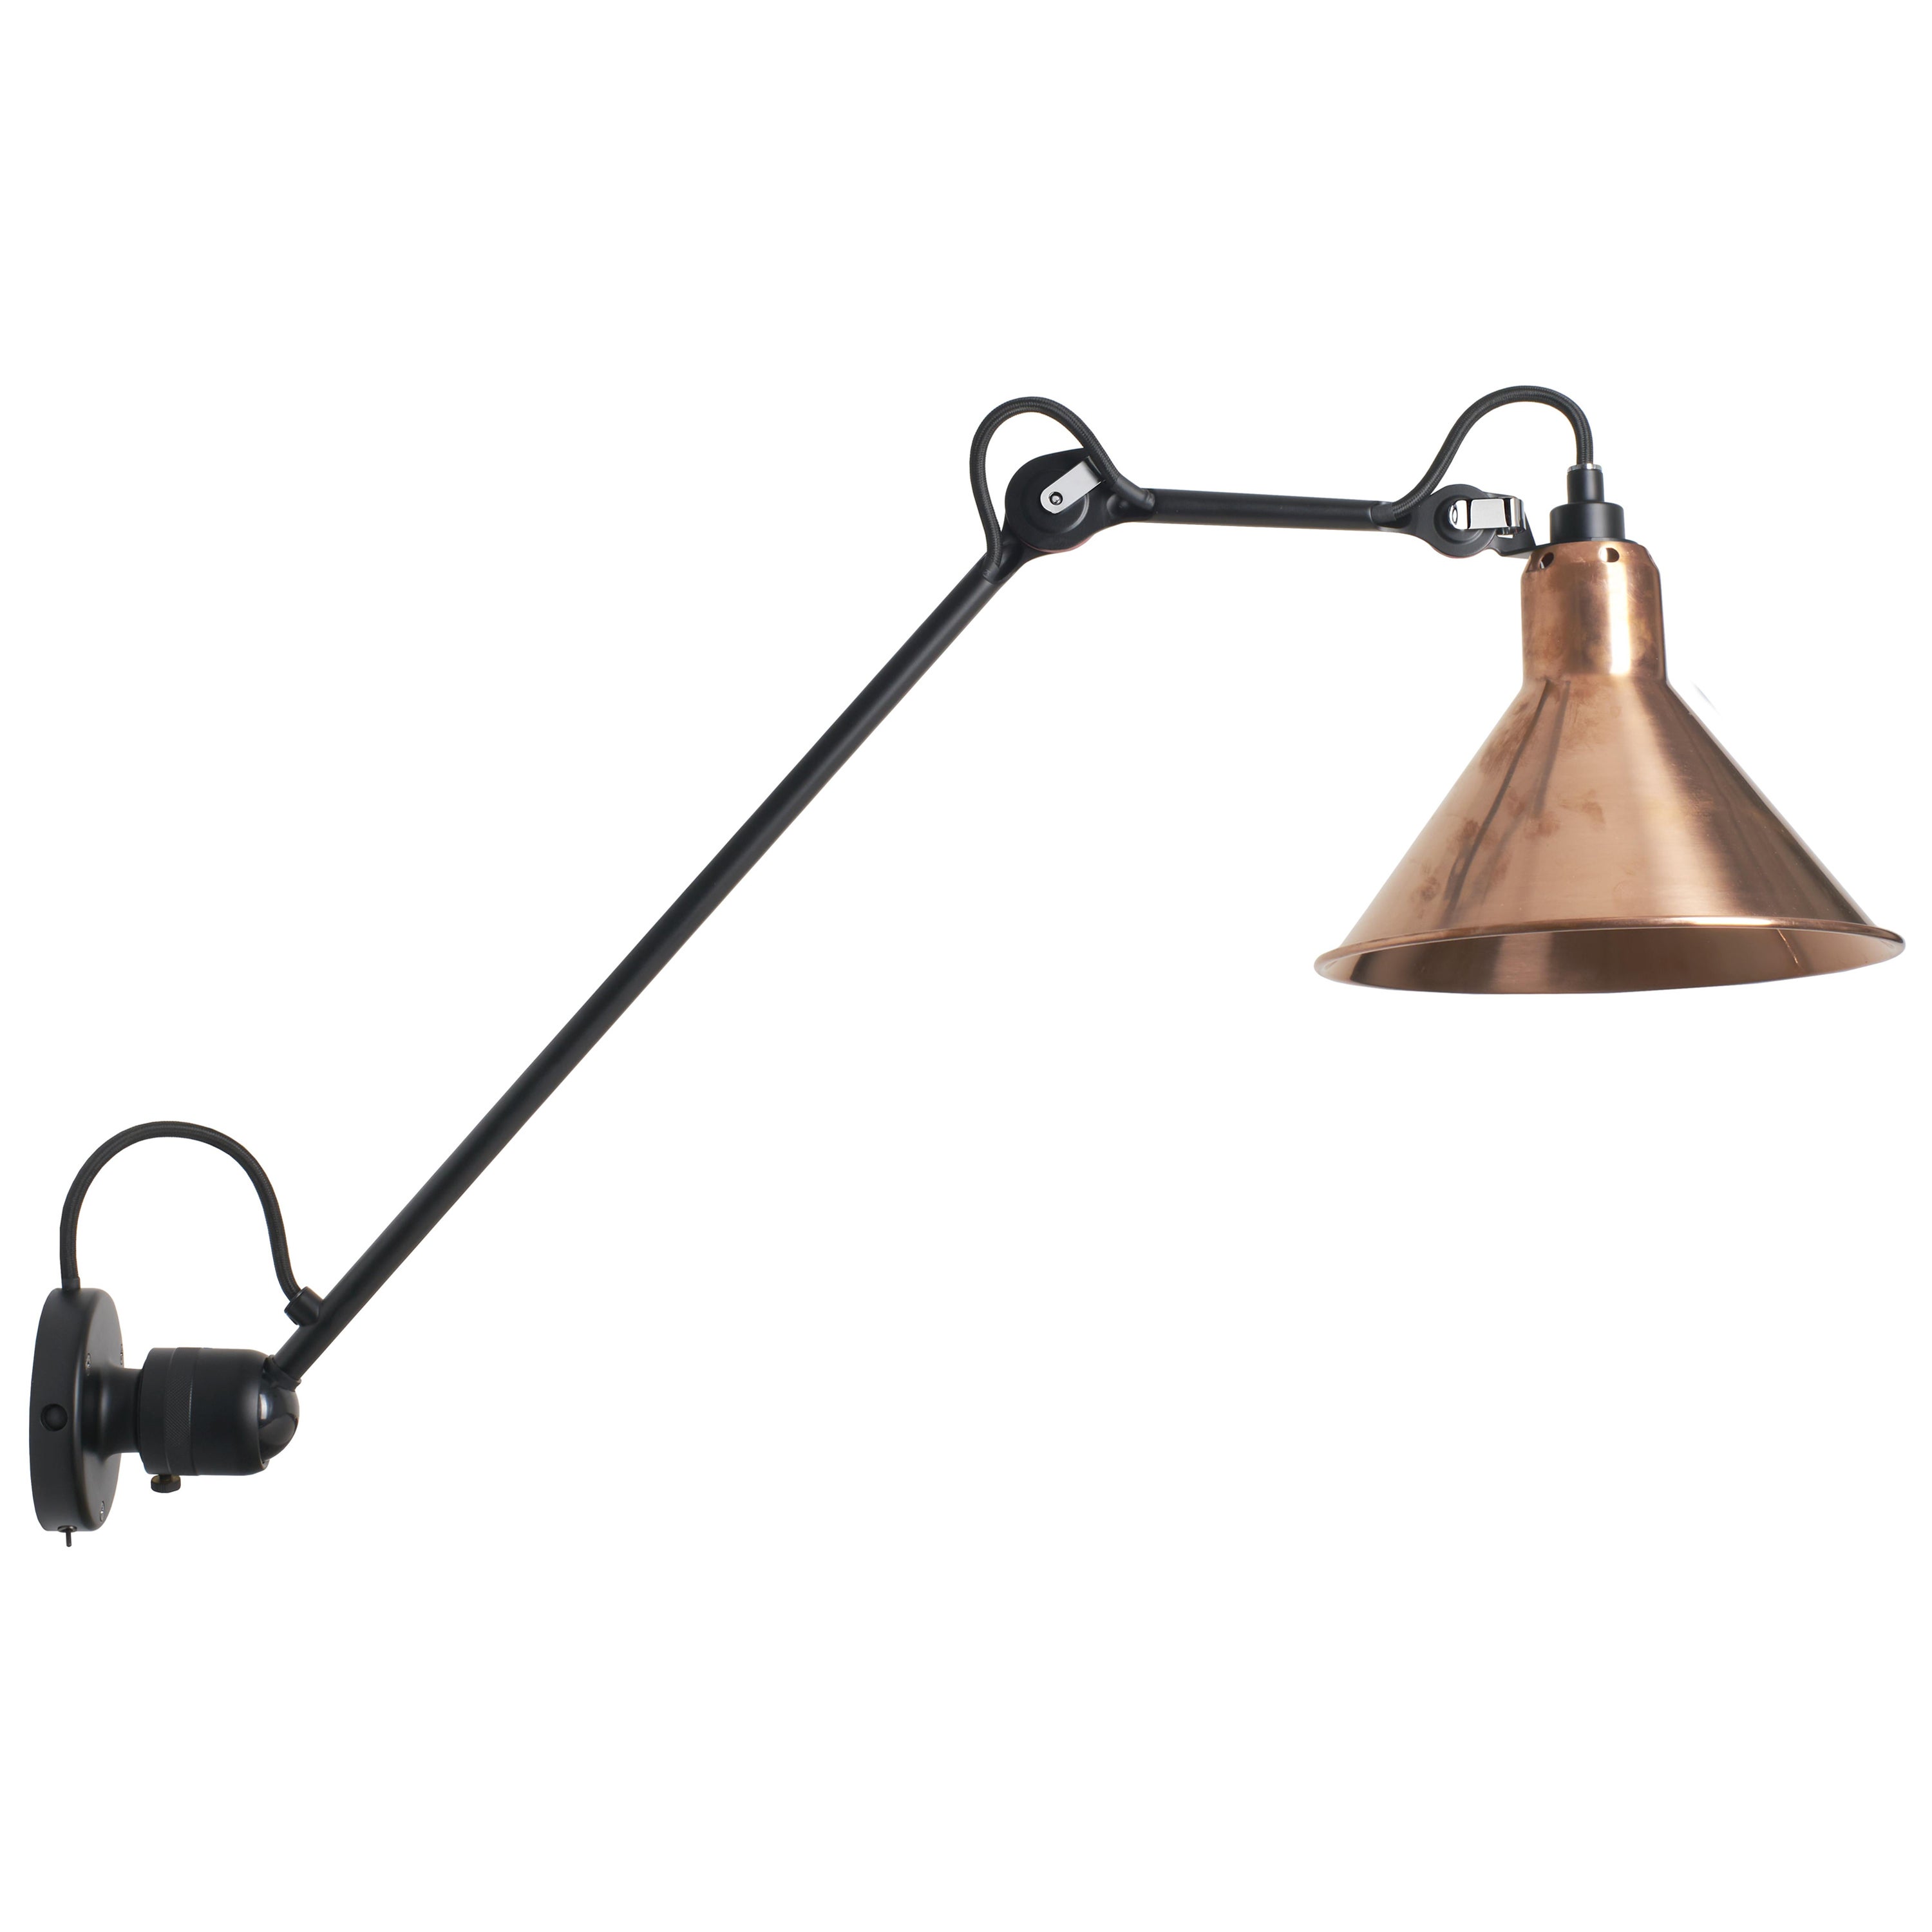 DCW Editions La Lampe Gras N°304 L40 SW Conic Wall Lamp in Raw Copper Shade